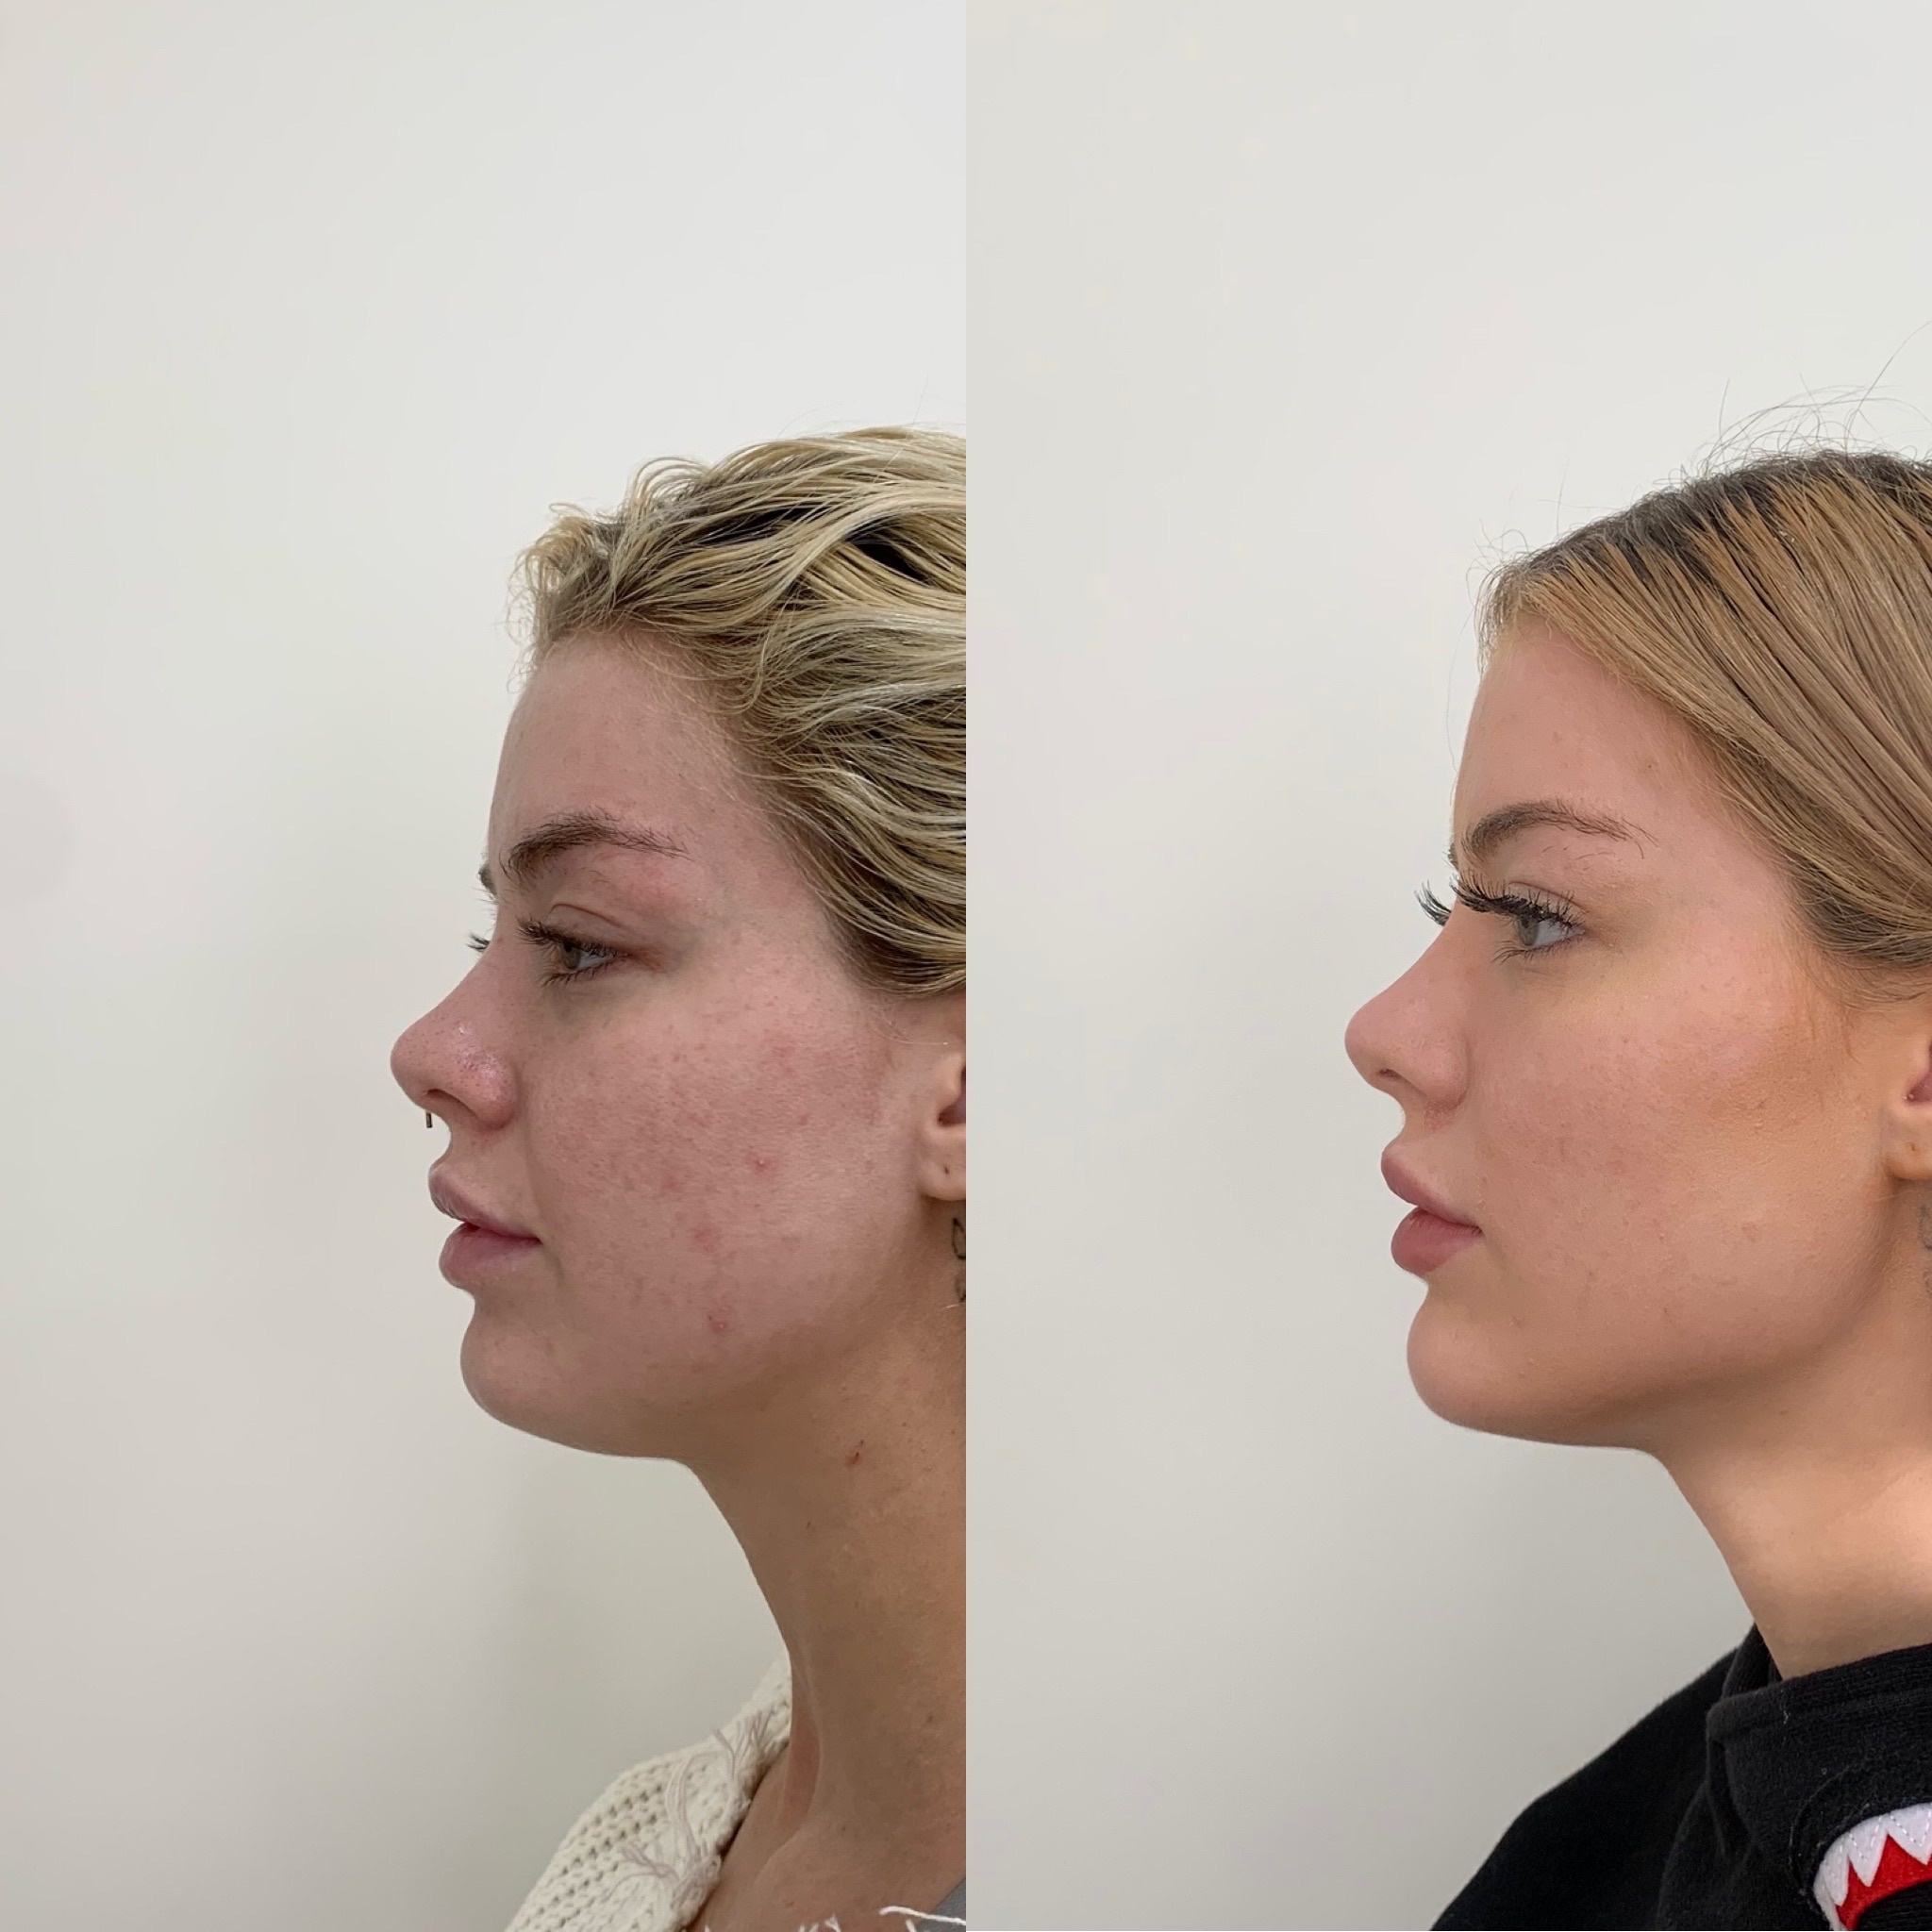 Before and After Fillers Treatment | Beauty Boost Med Spa in Newport Beach, CA